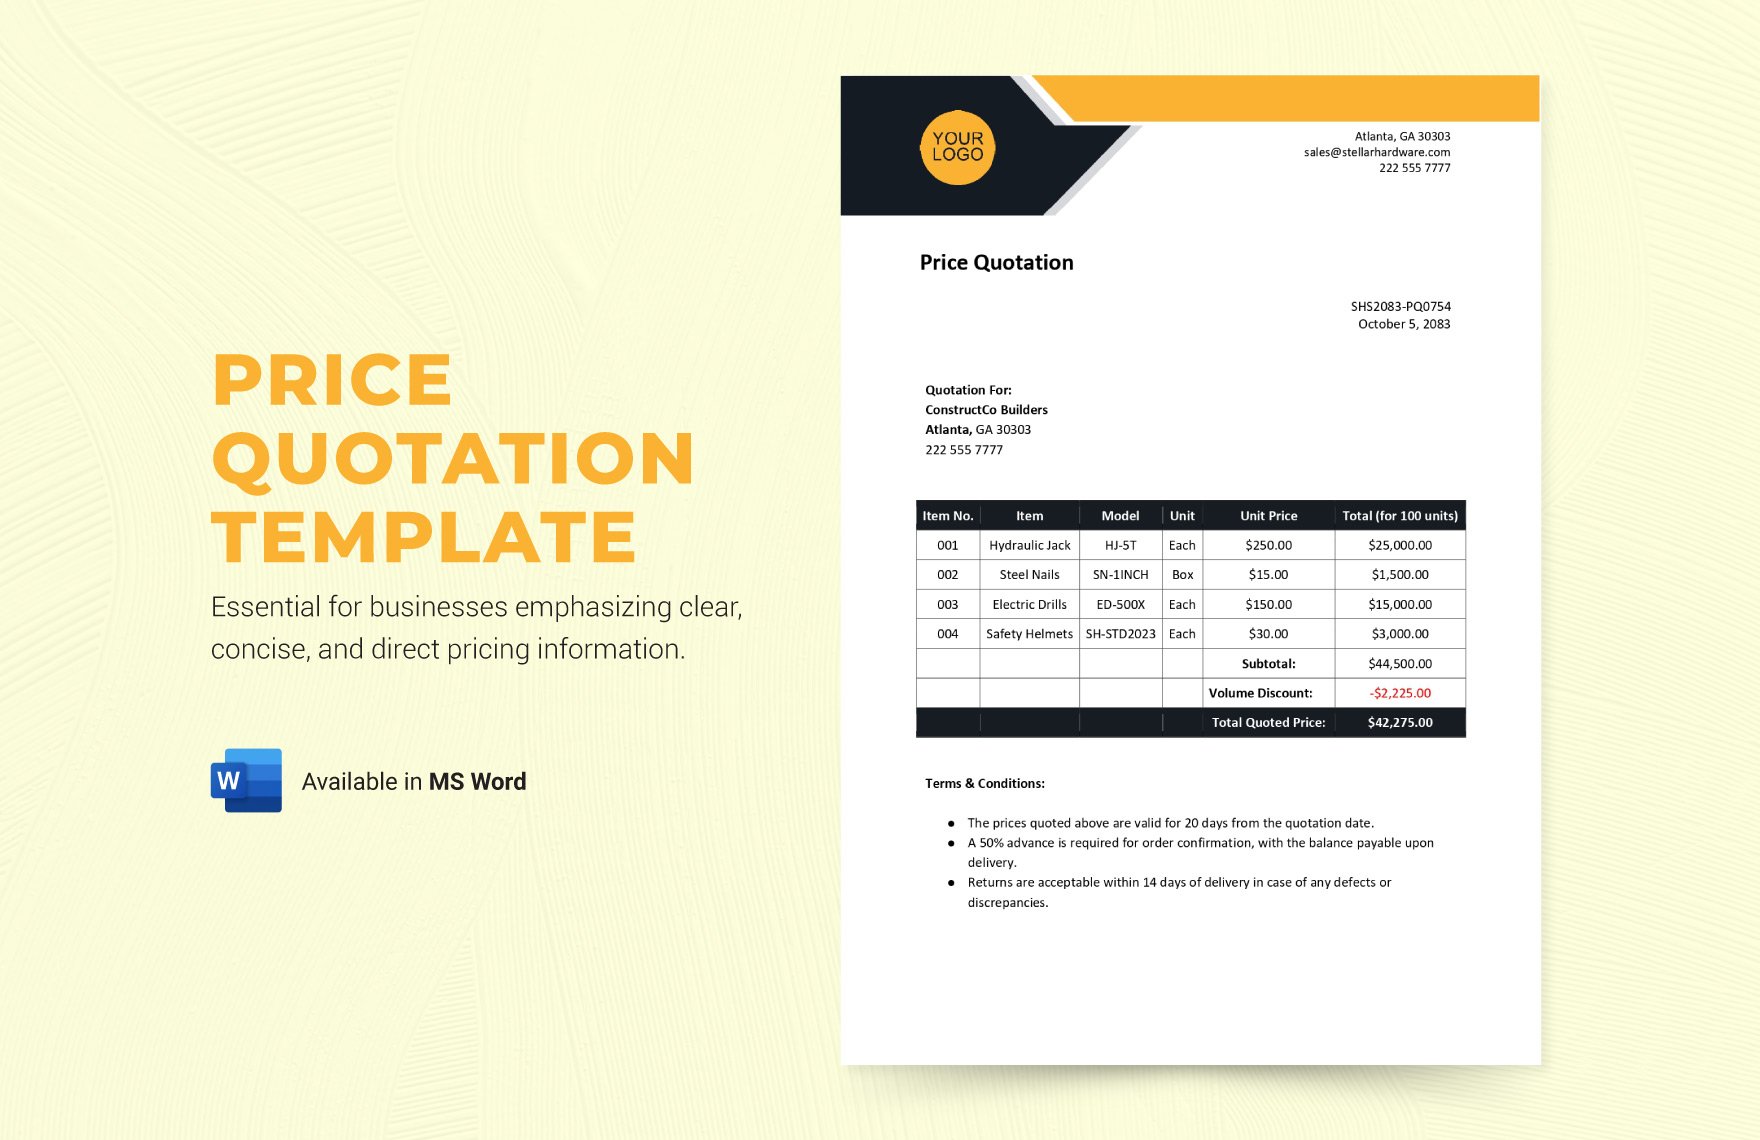 Price Quotation Template in Word